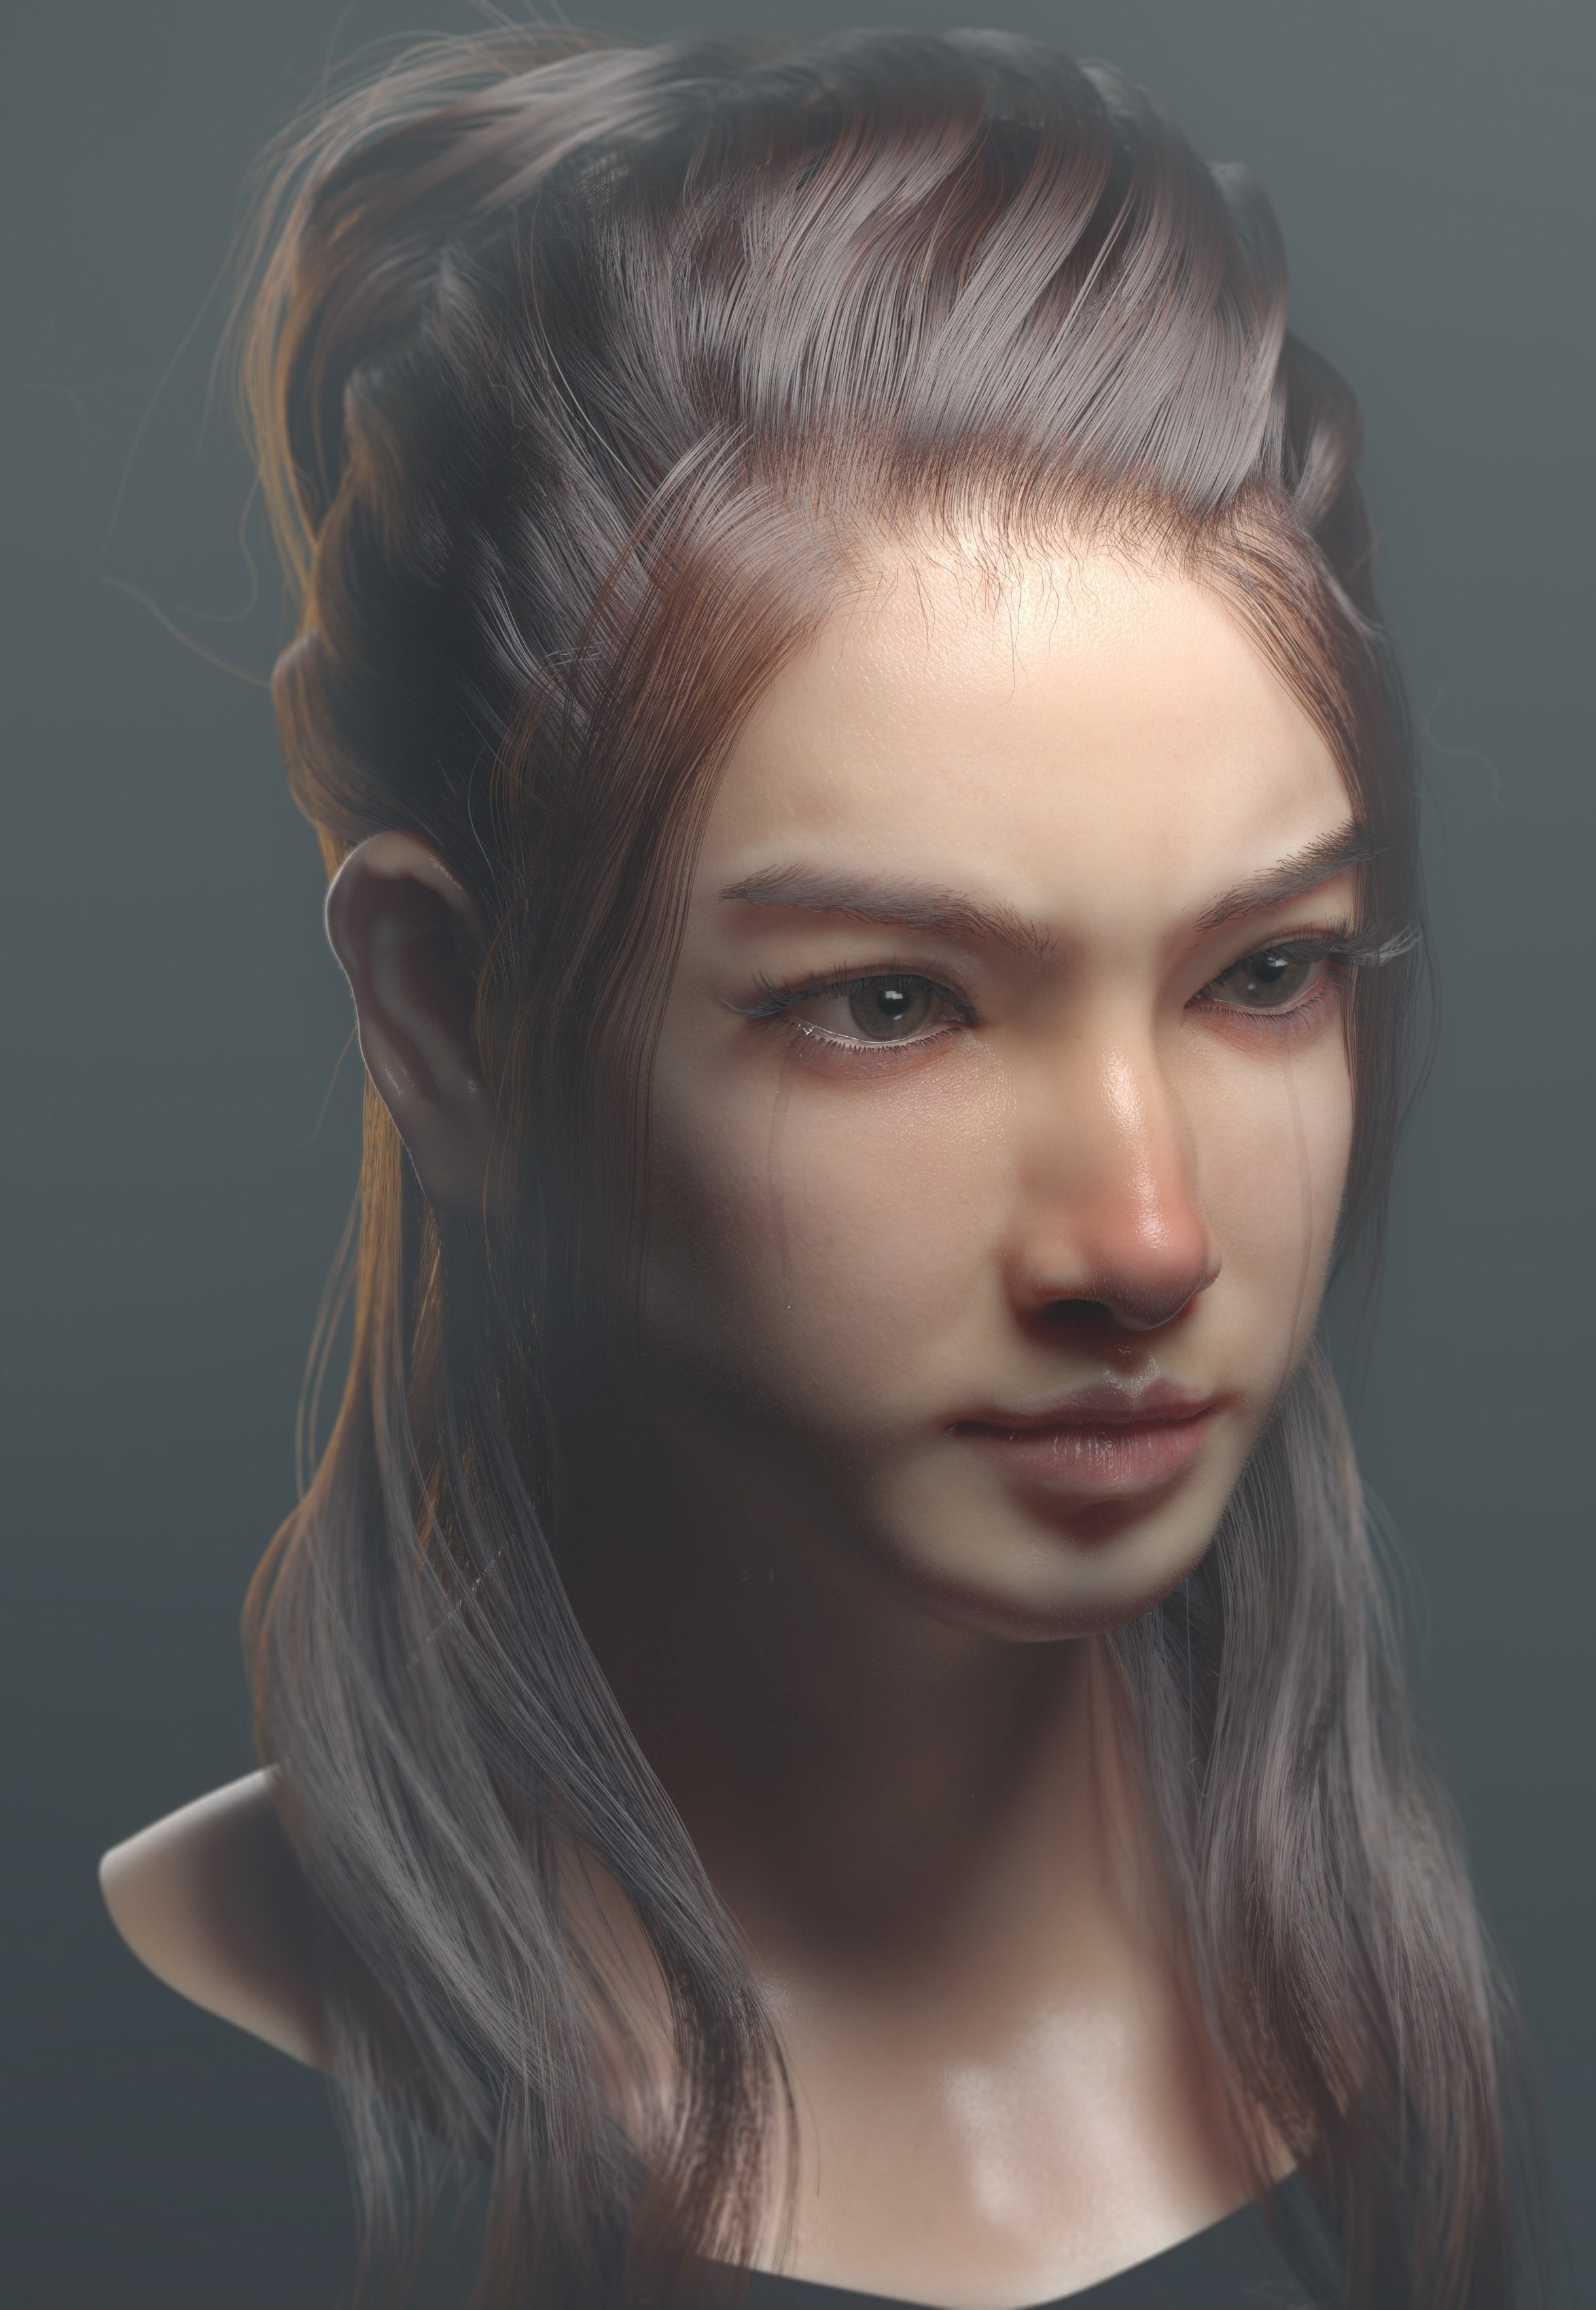 Asian female head test - ZBrushCentral